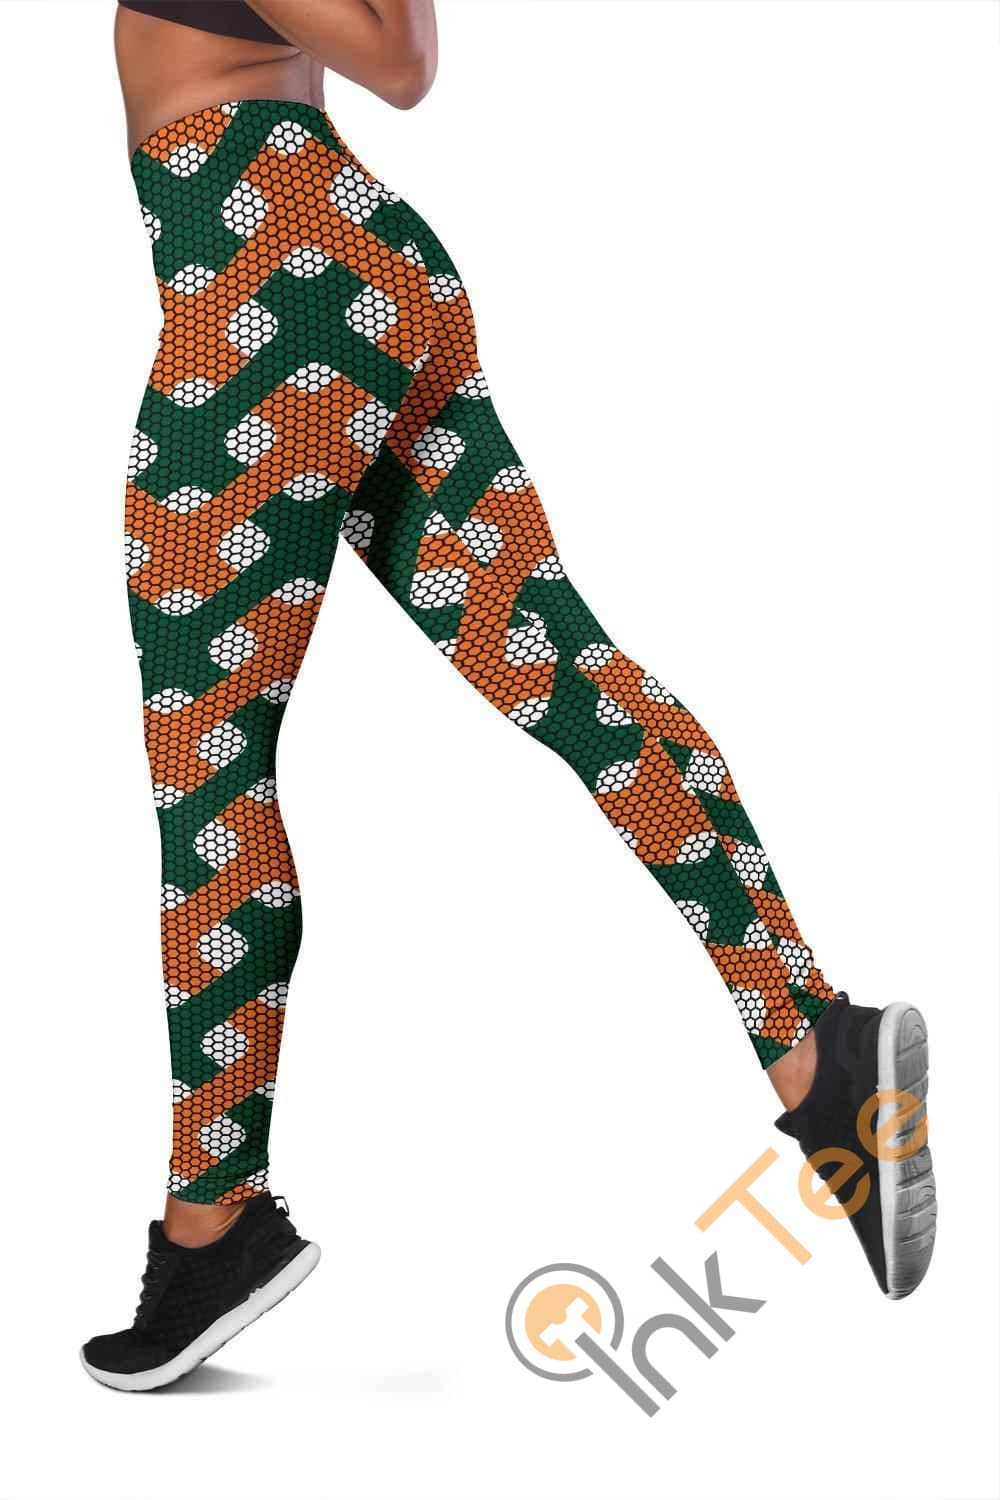 Inktee Store - Miami Hurricanes Inspired Liberty White 3D All Over Print For Yoga Fitness Fashion Women'S Leggings Image